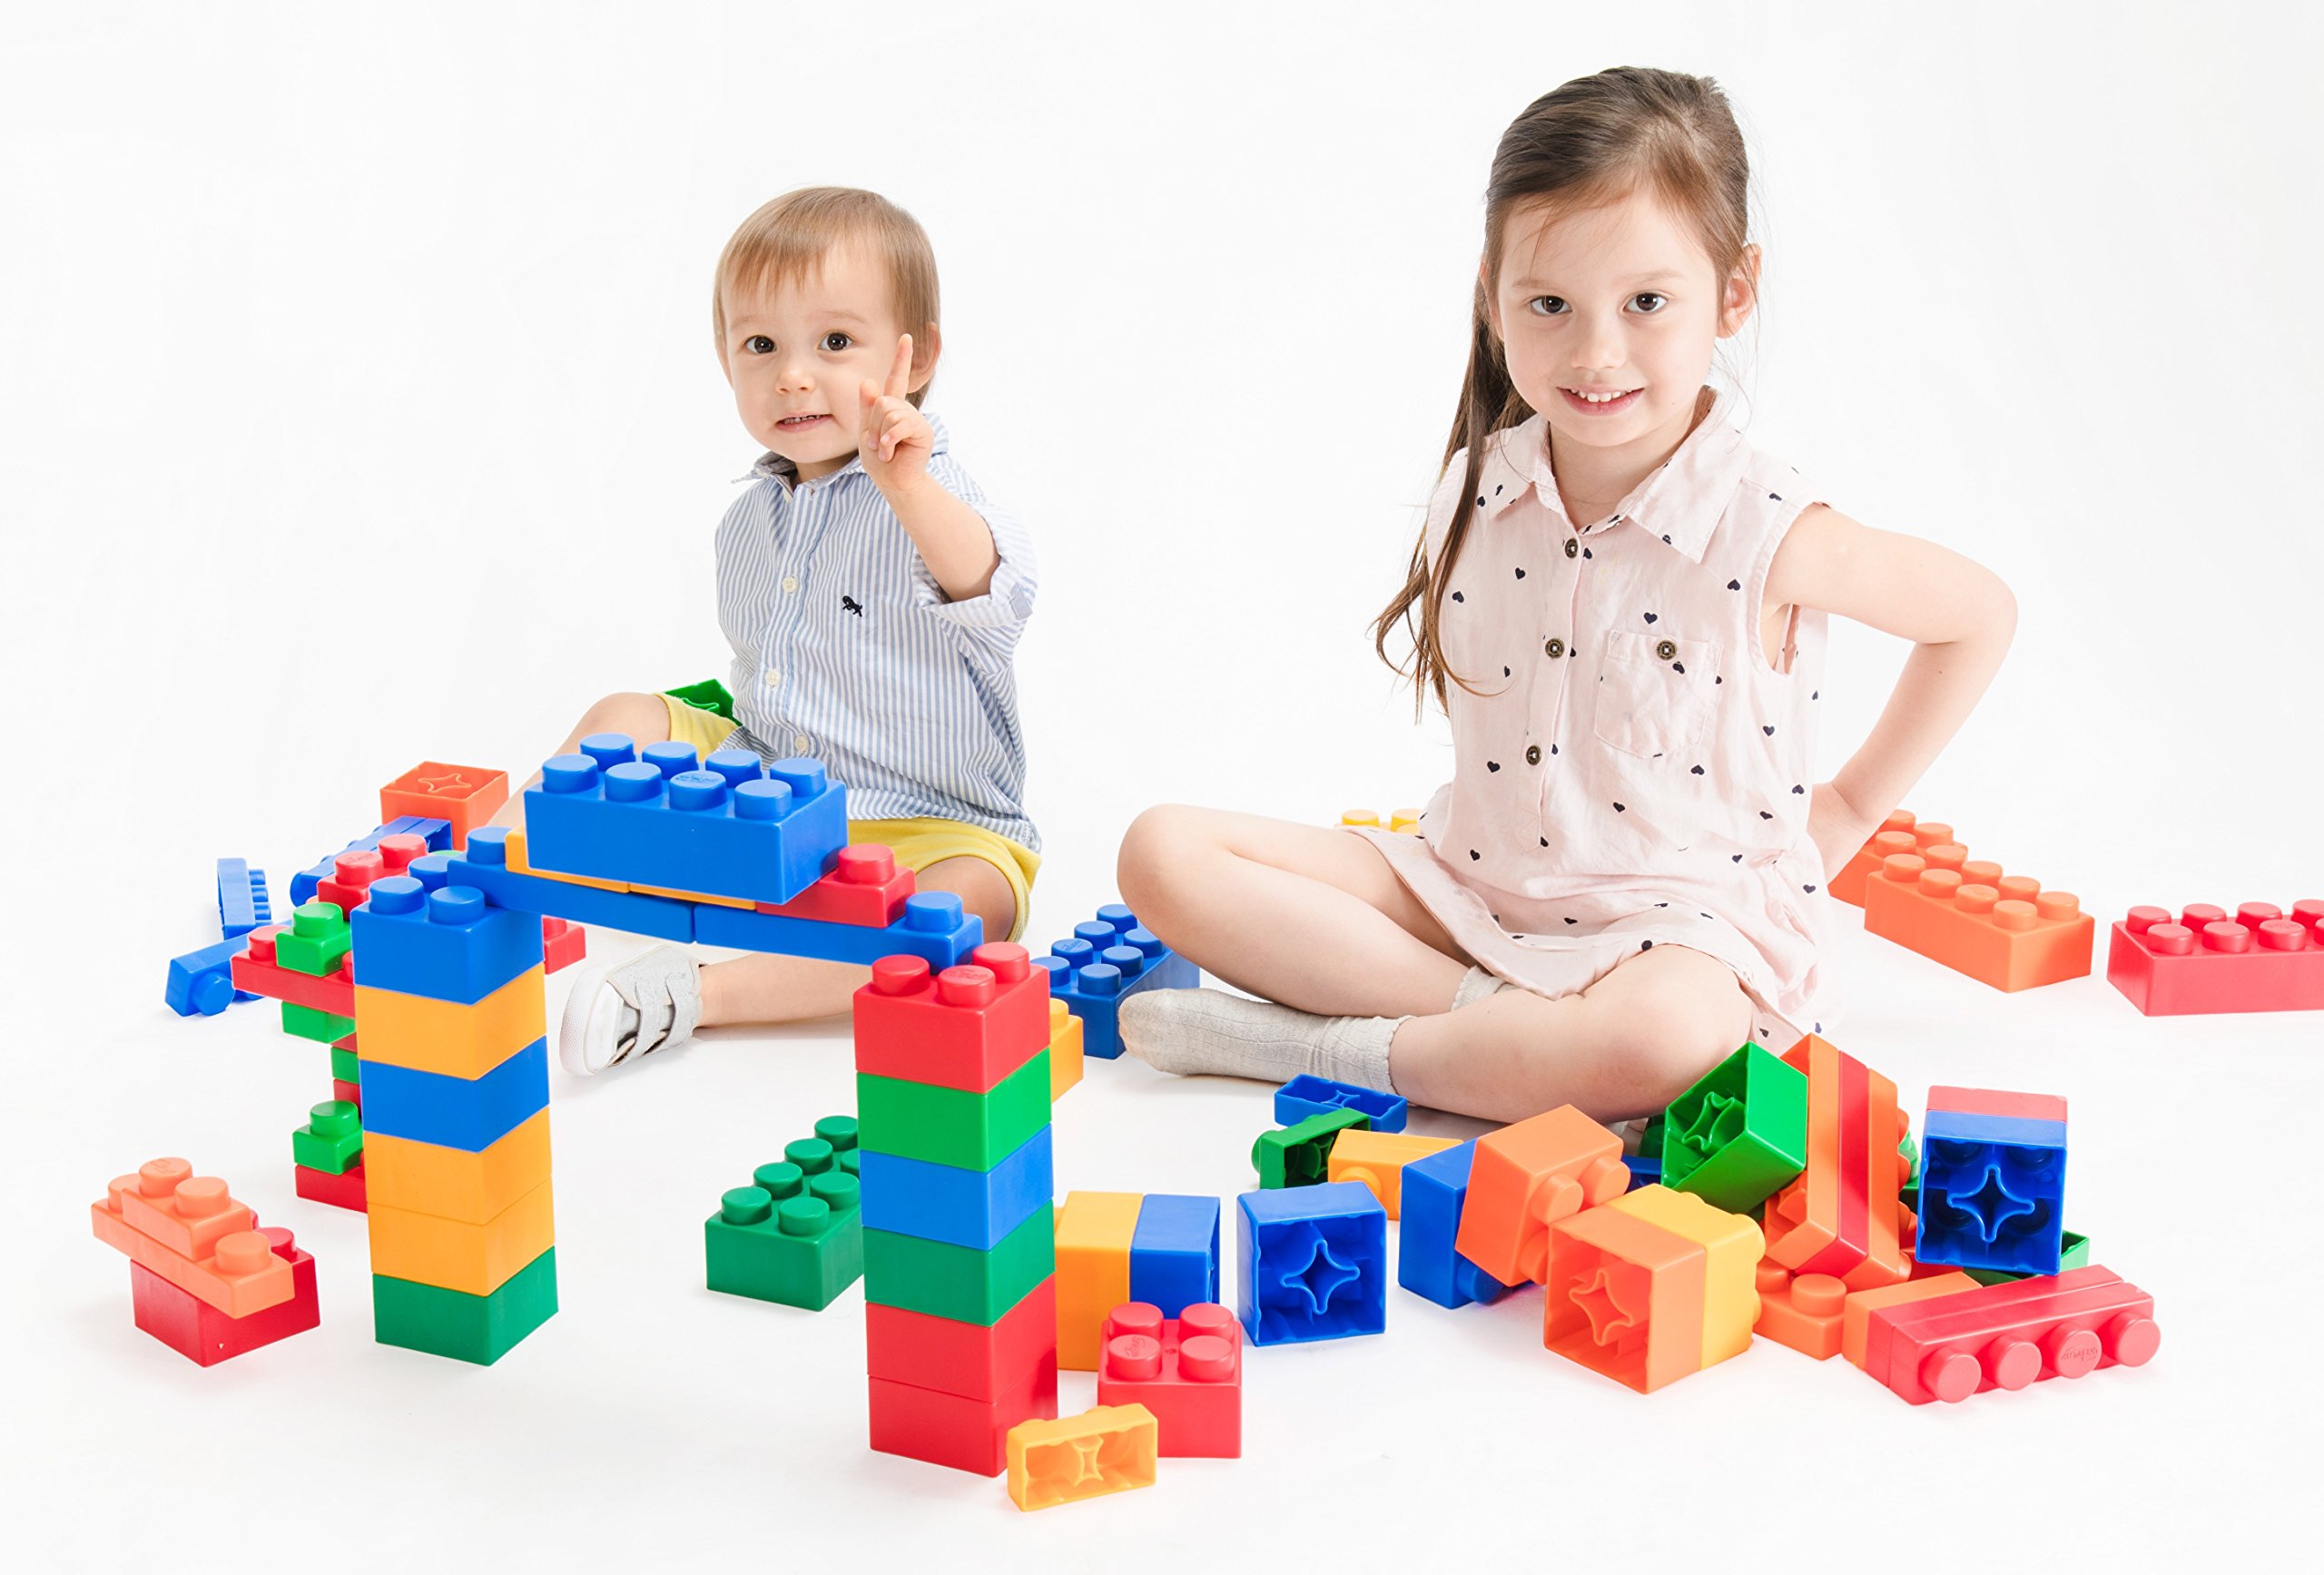 UNiPLAY Mix Soft Building Blocks for Early Learning, Educational and Sensory Unisex Toy, Infant Cognitive Development (120-Piece Set)